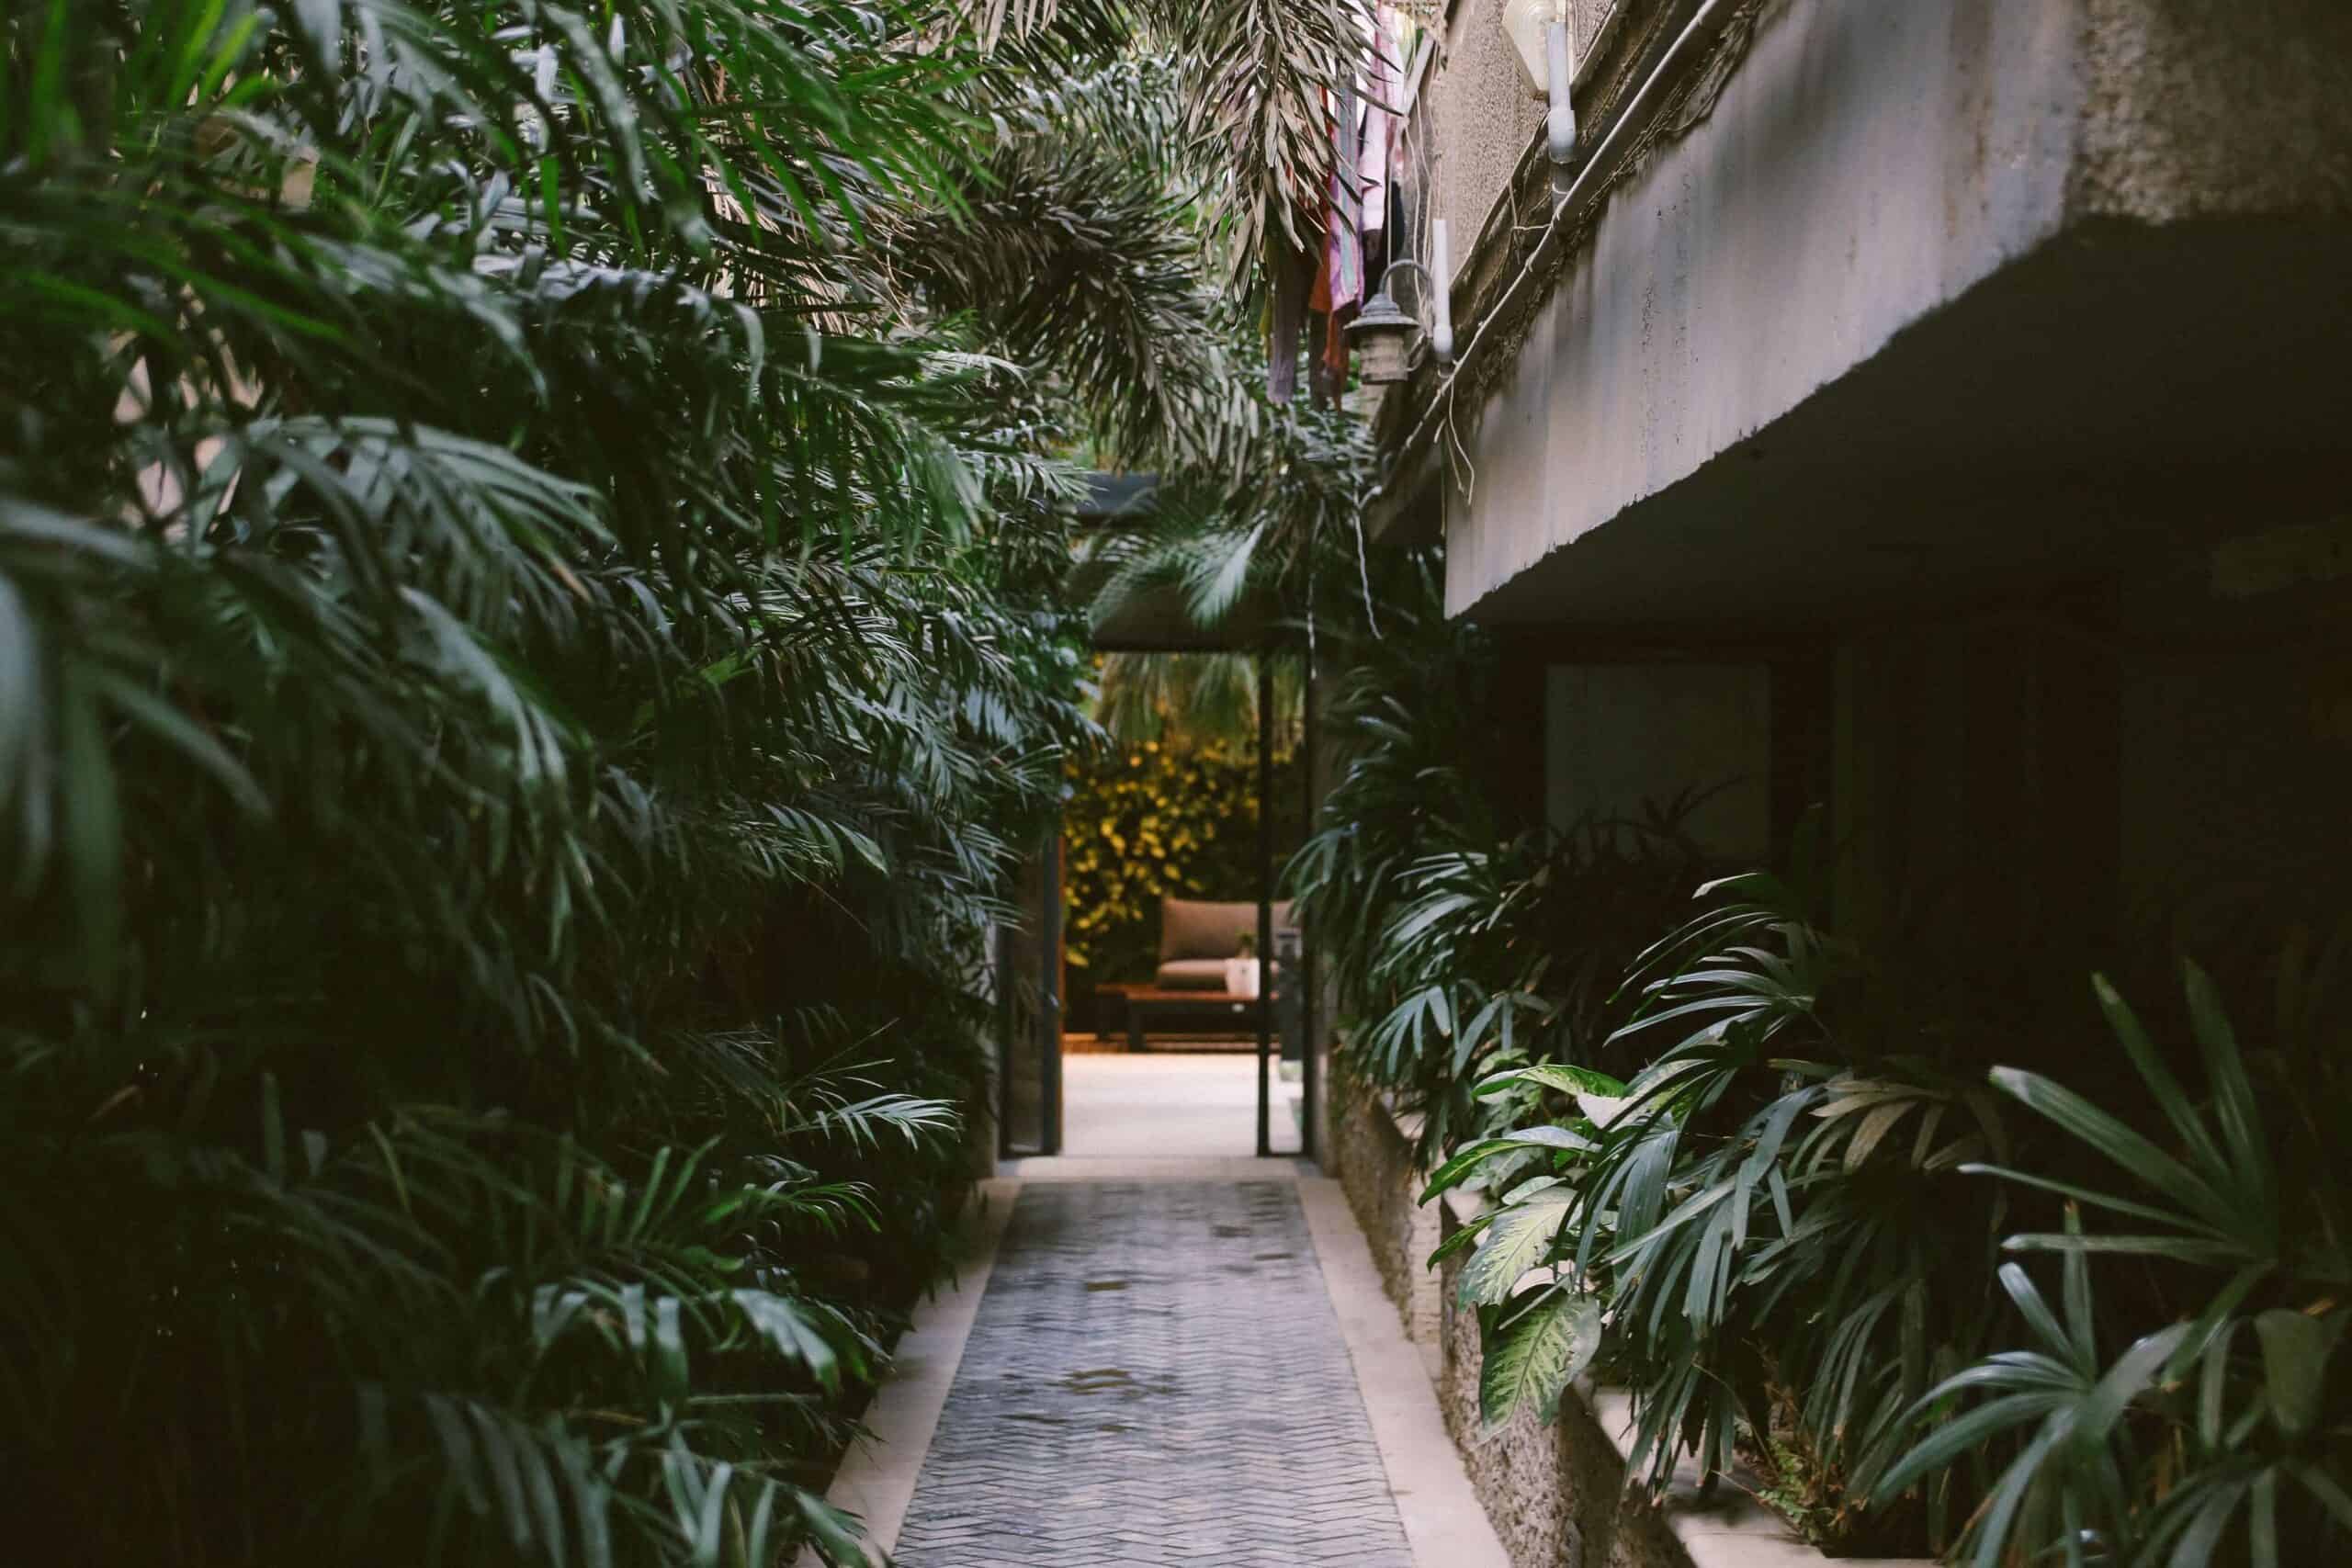 Tropical plants in a narrow alley next to a house